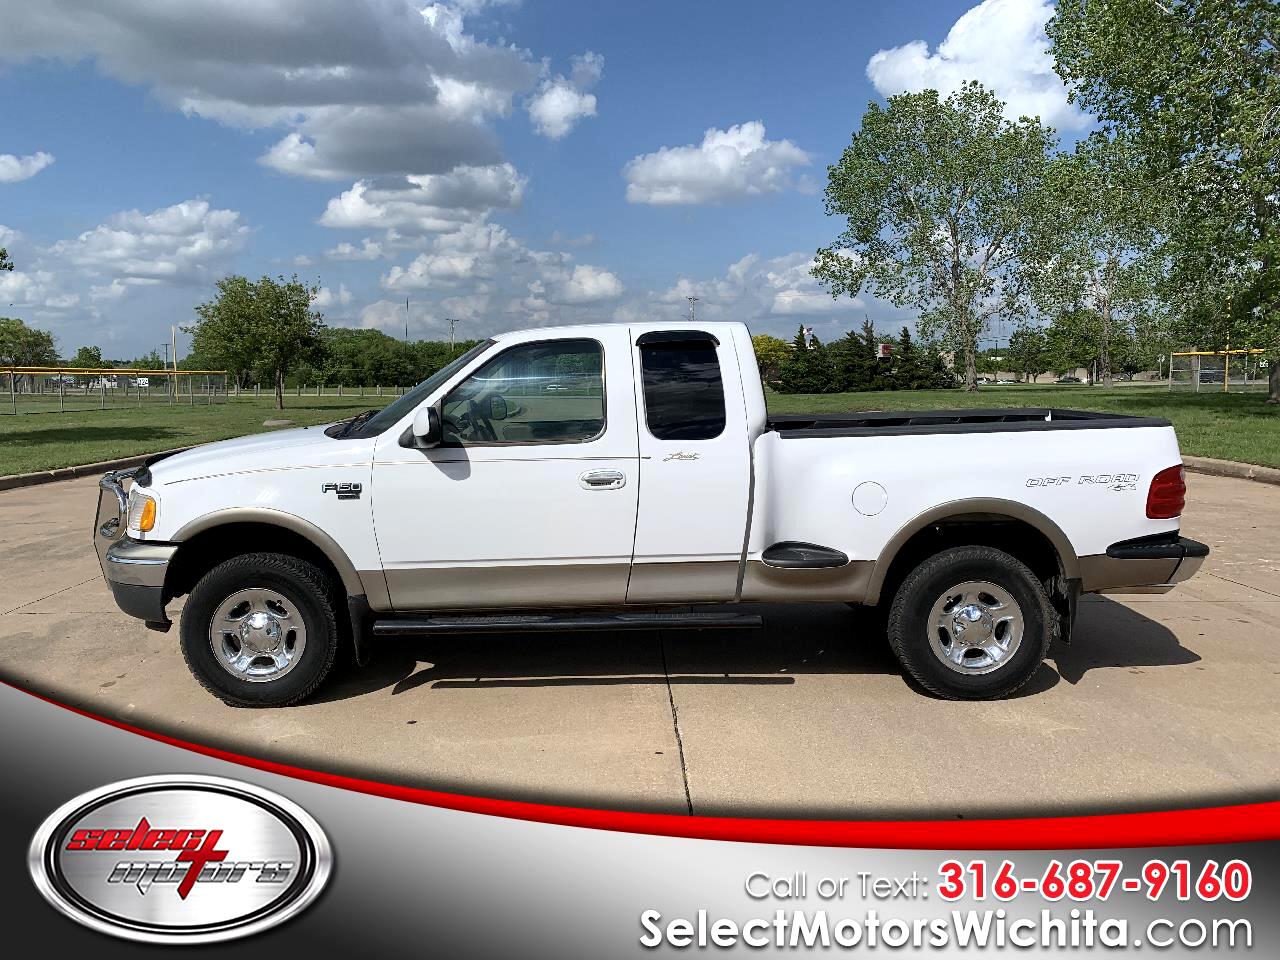 Used 2001 Ford F-150 Supercab Flareside 139" Lariat 4WD for Sale in 2001 Ford F150 5.4 Towing Capacity